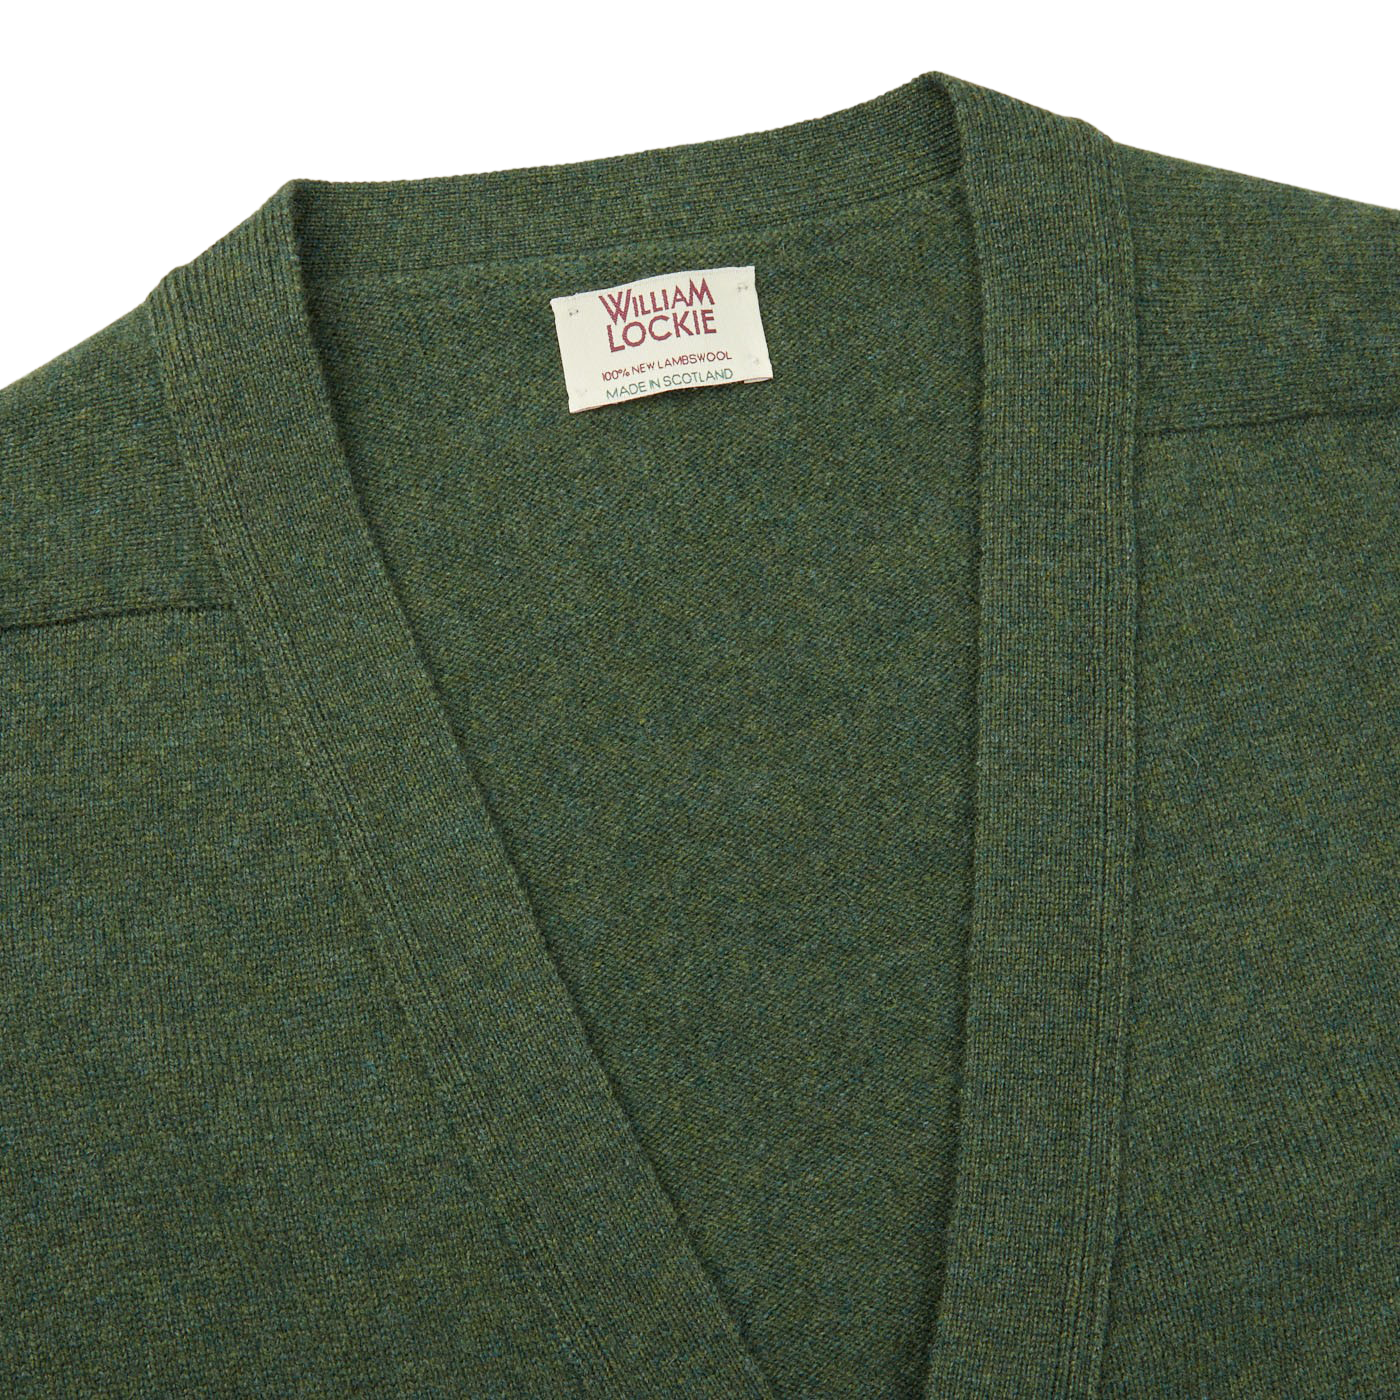 A William Lockie Rosemary Green Lambswool Saddle Shoulder Cardigan with a label on it, perfect for layering.